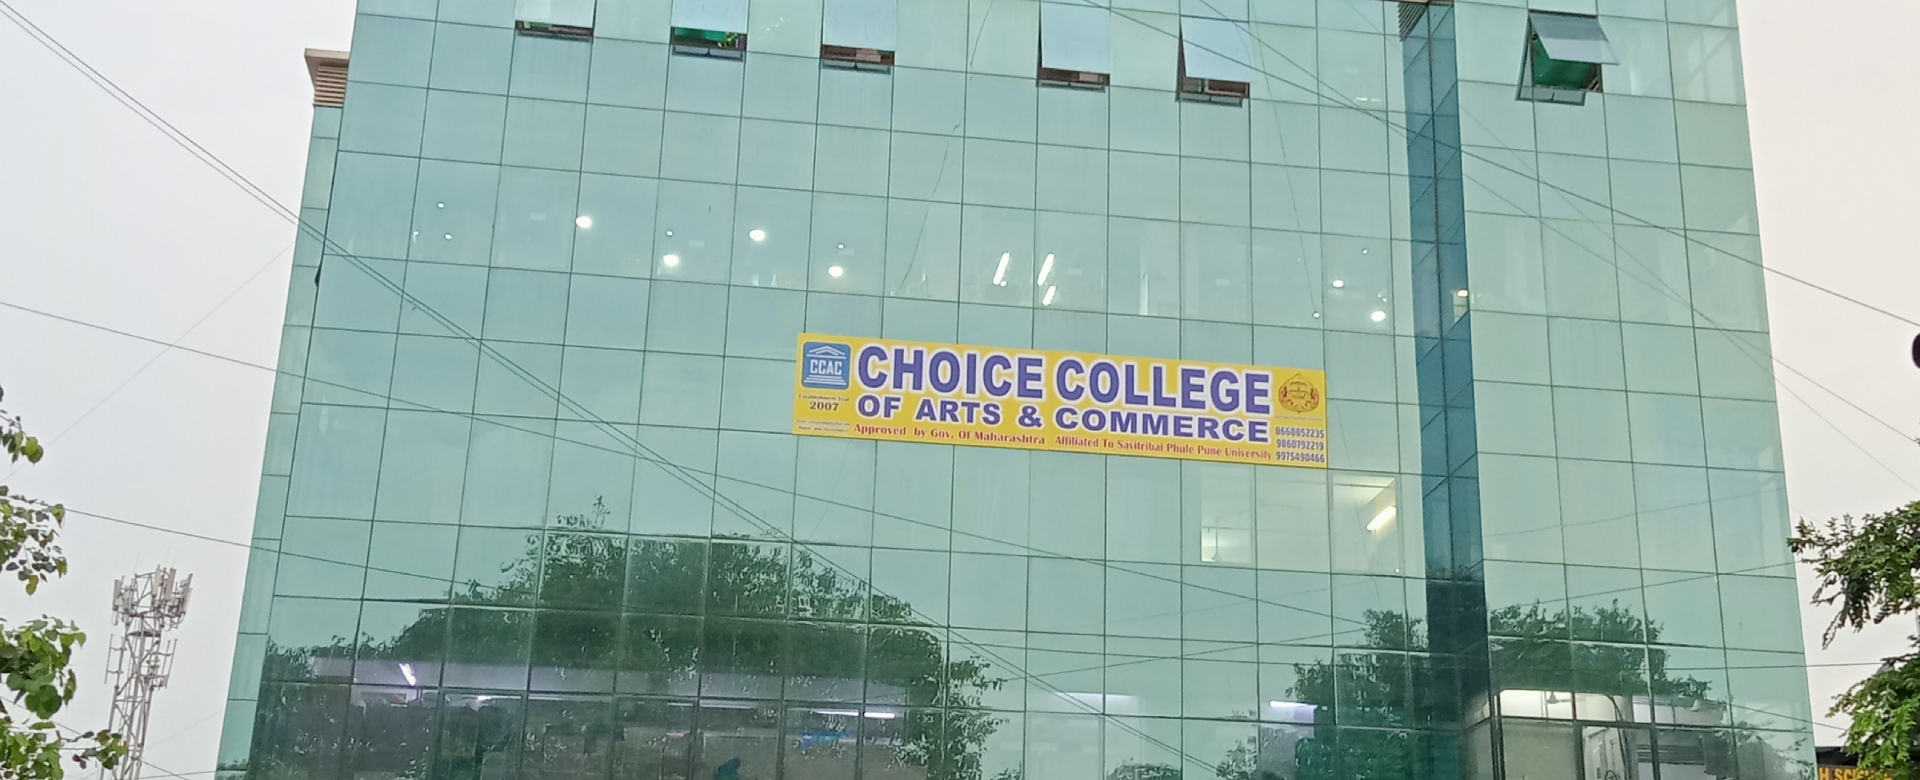 Choice College of Arts & Commerce